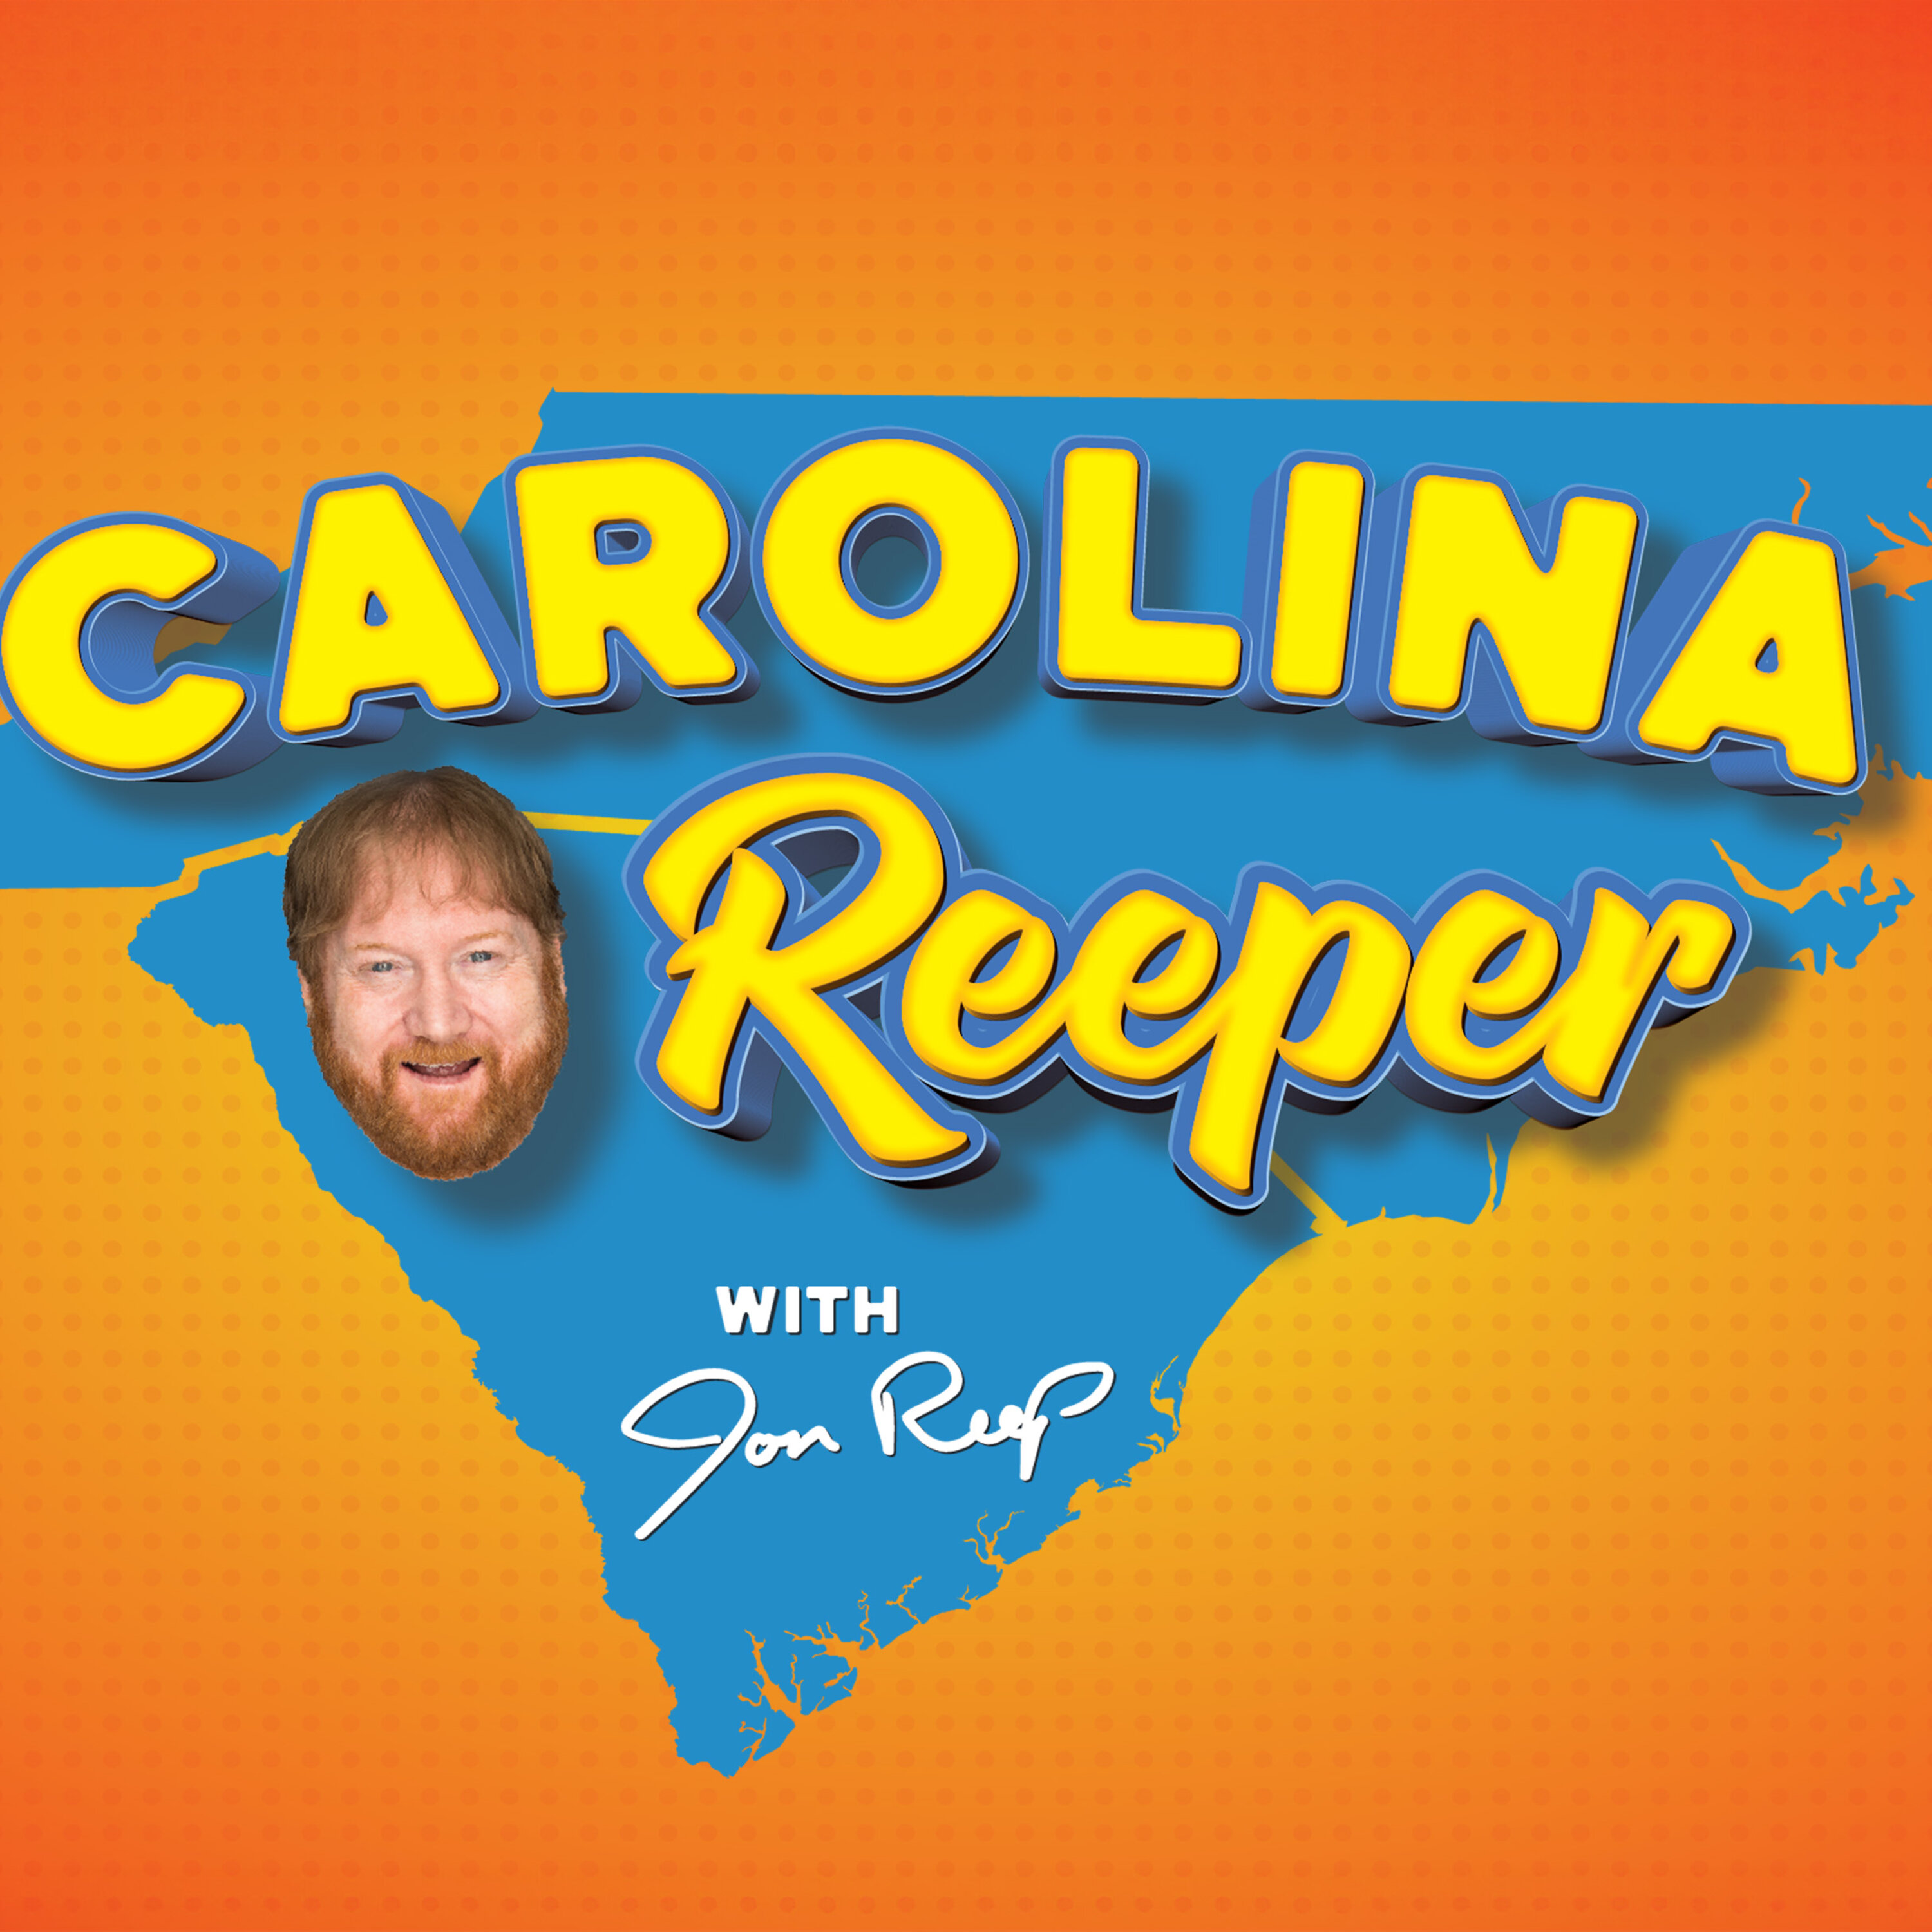 Taylor Swift, New Hot Peppers and Stand-Up in Lenoir! The Carolina Reeper Show with Jon Reep!